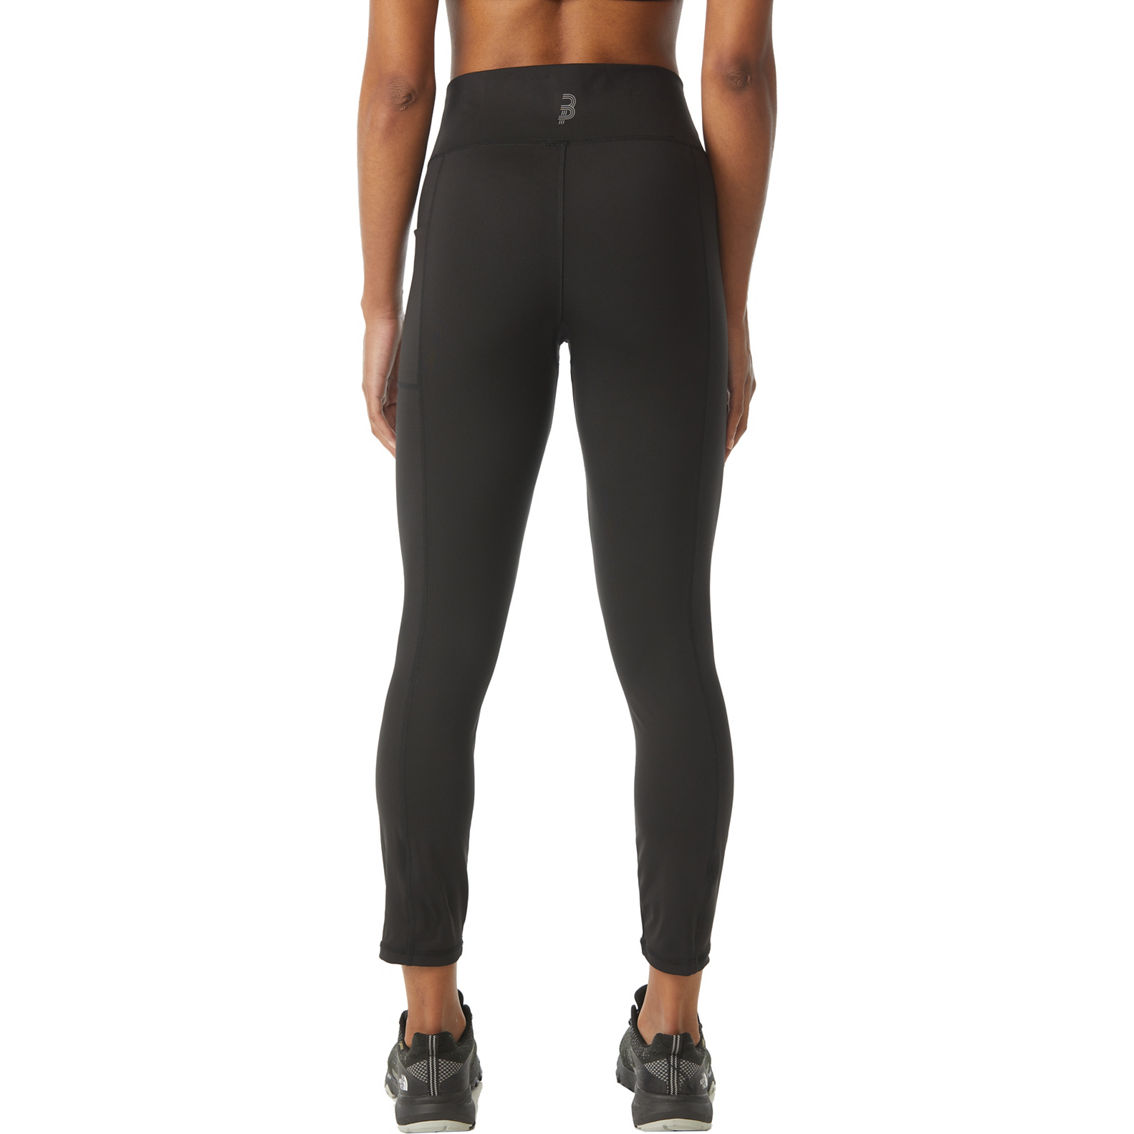 3 Paces 7/8 Solid Leggings - Image 2 of 3